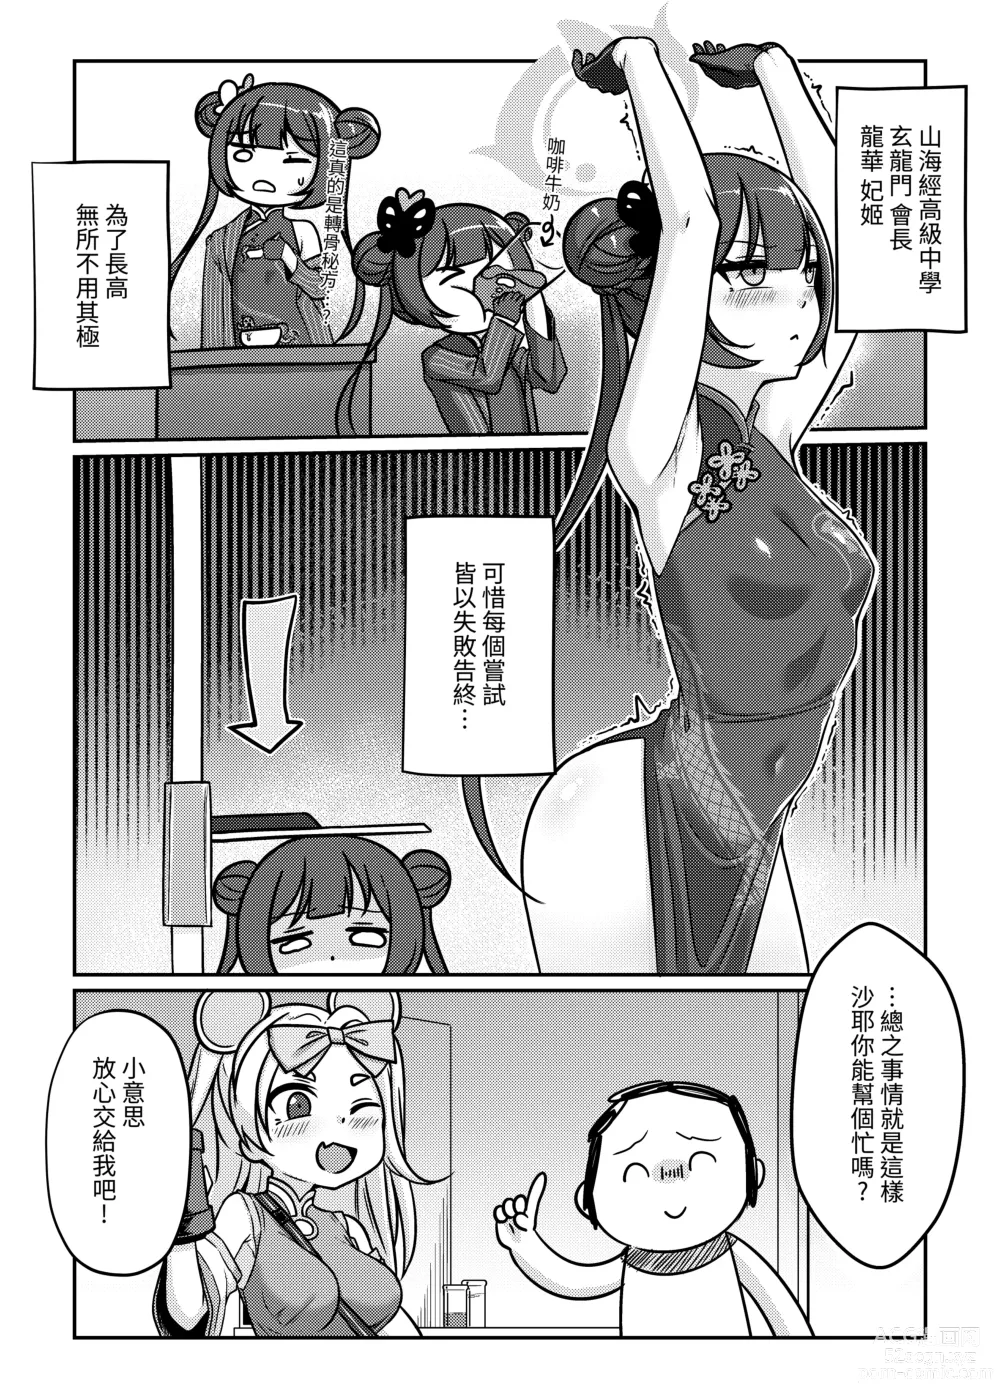 Page 3 of doujinshi 絕命狼師